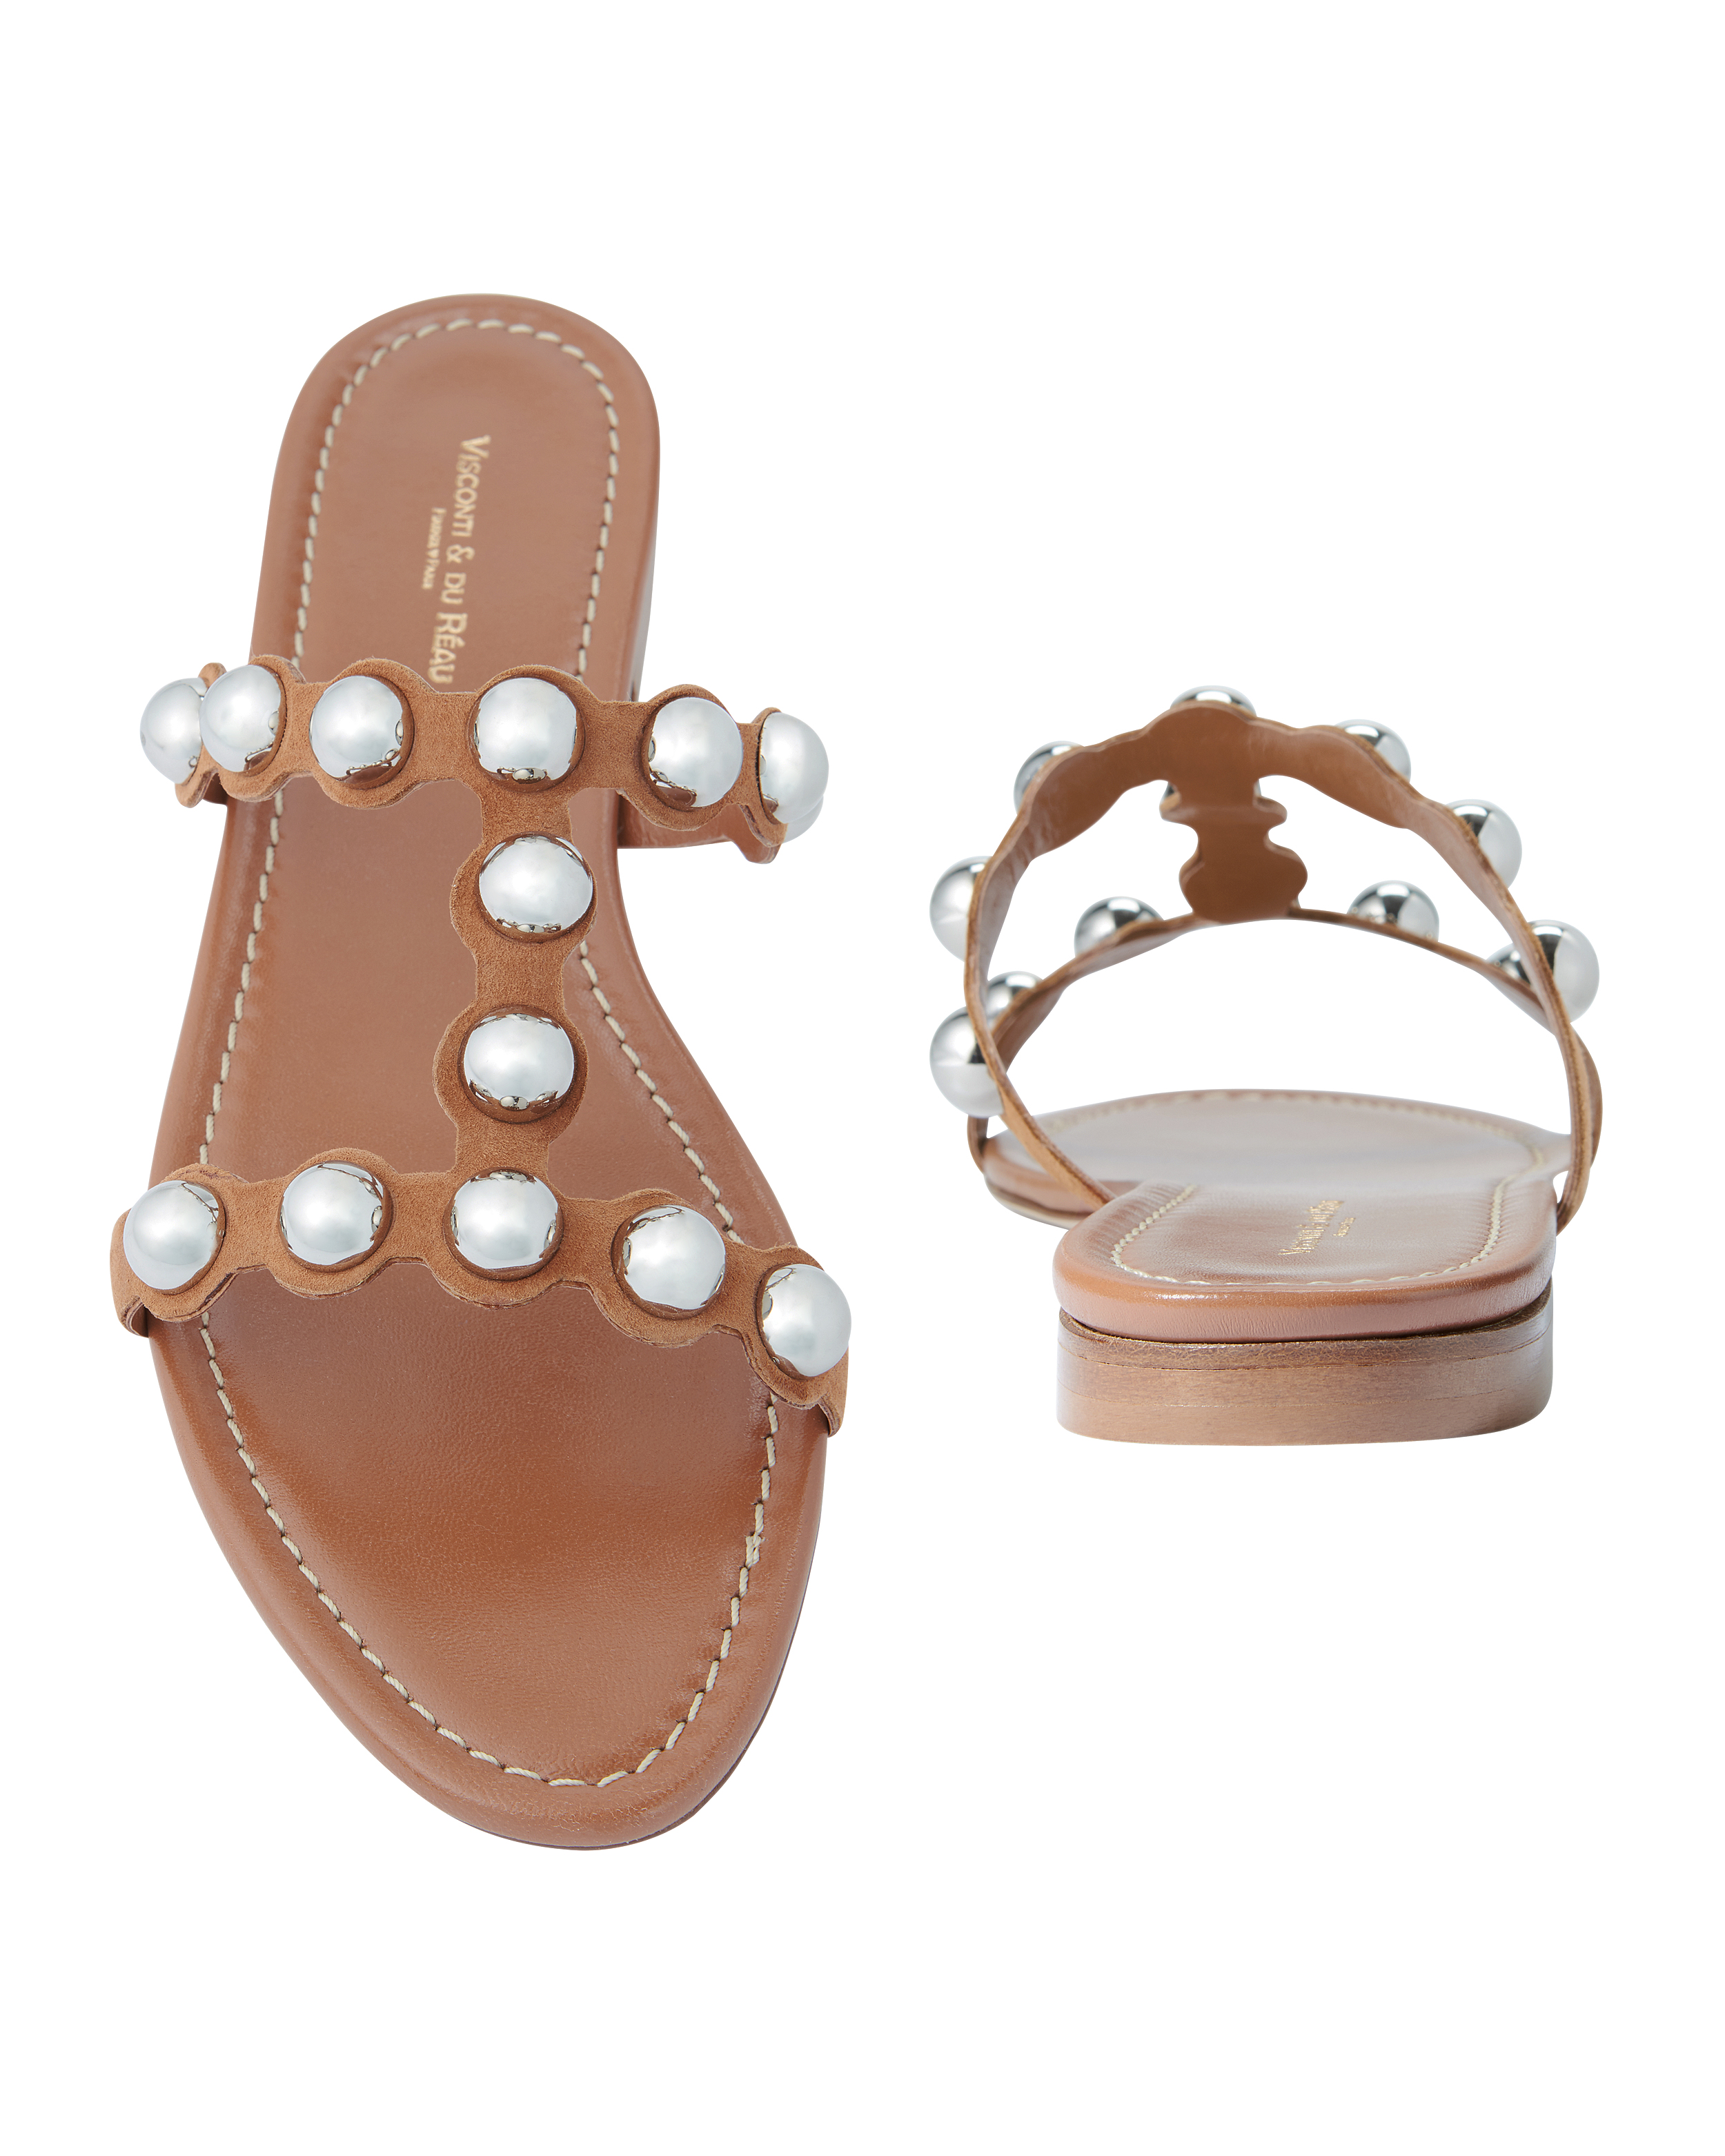 Lia Studded Suede Sandals